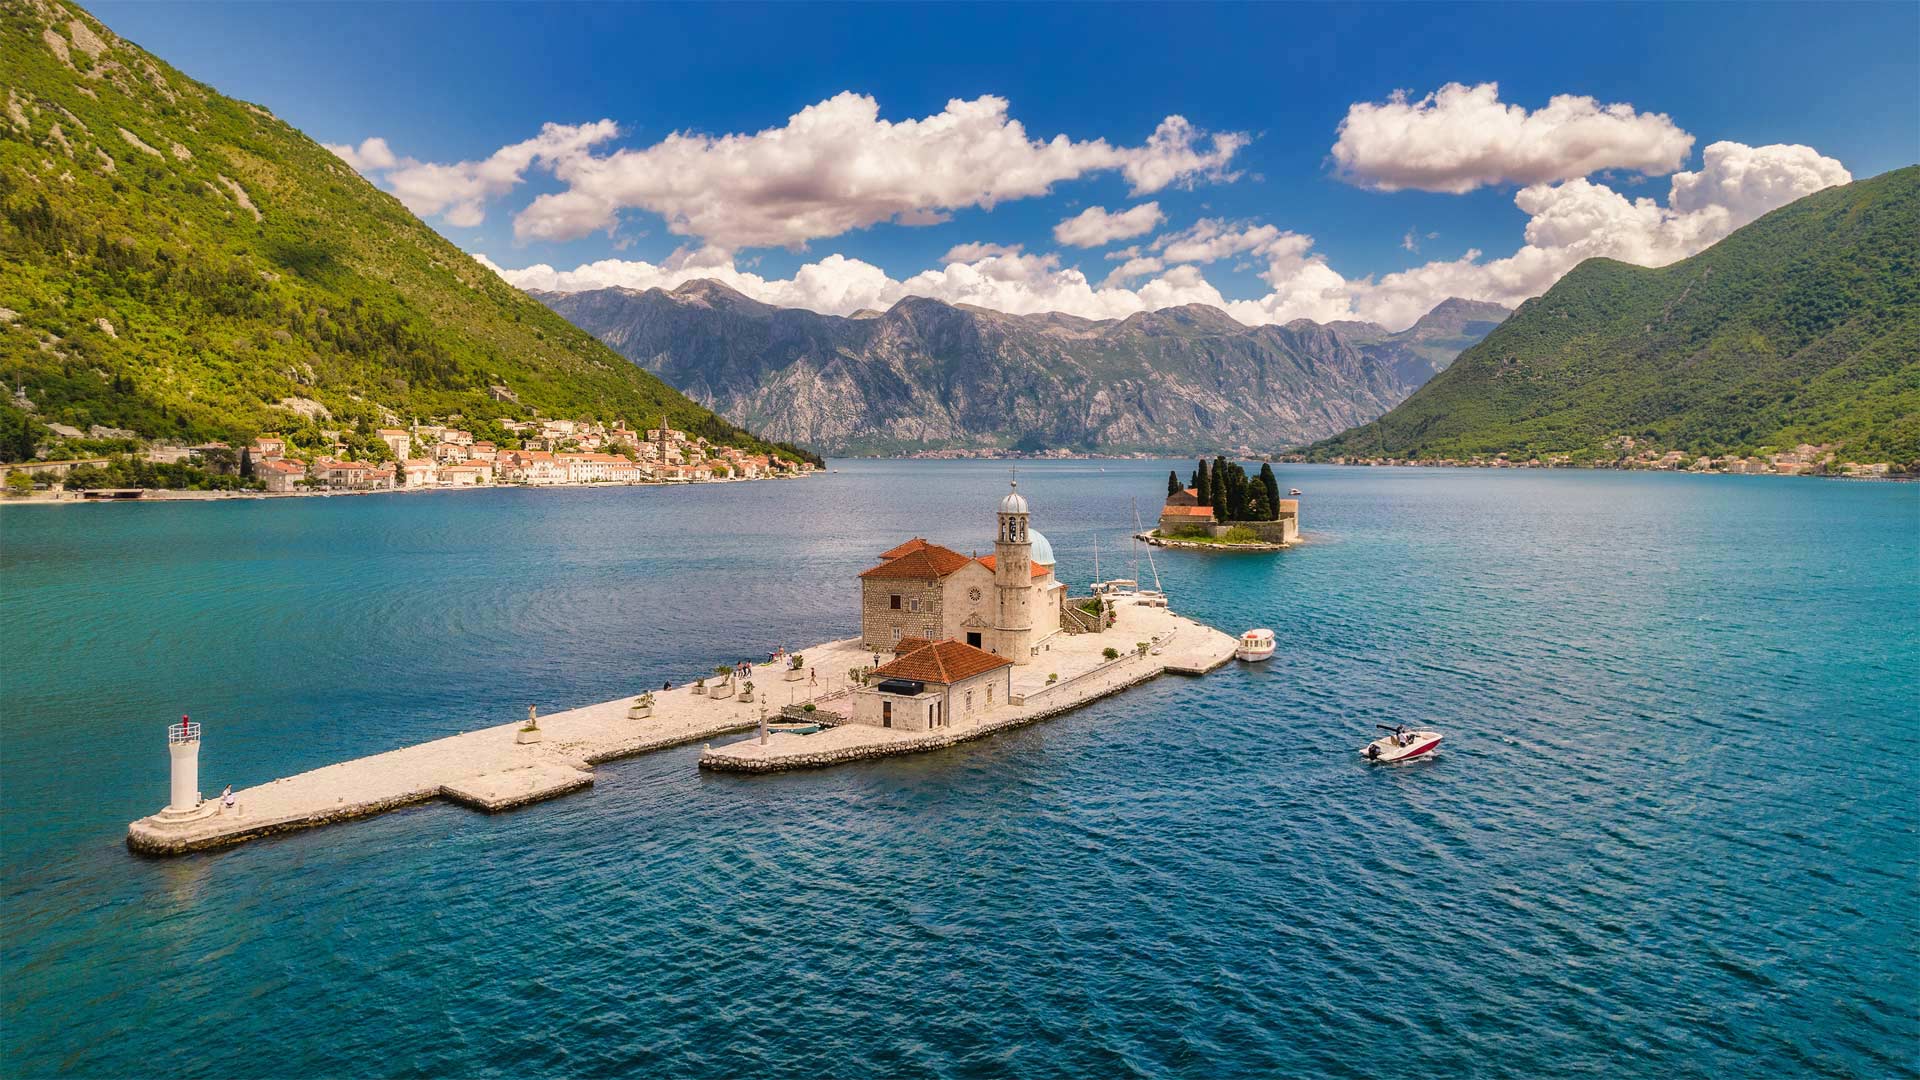 Our Lady of the Rocks and Saint George Island in the Bay of Kotor, Perast, Montenegro - Dmitrii Sakharov/Shutterstock)